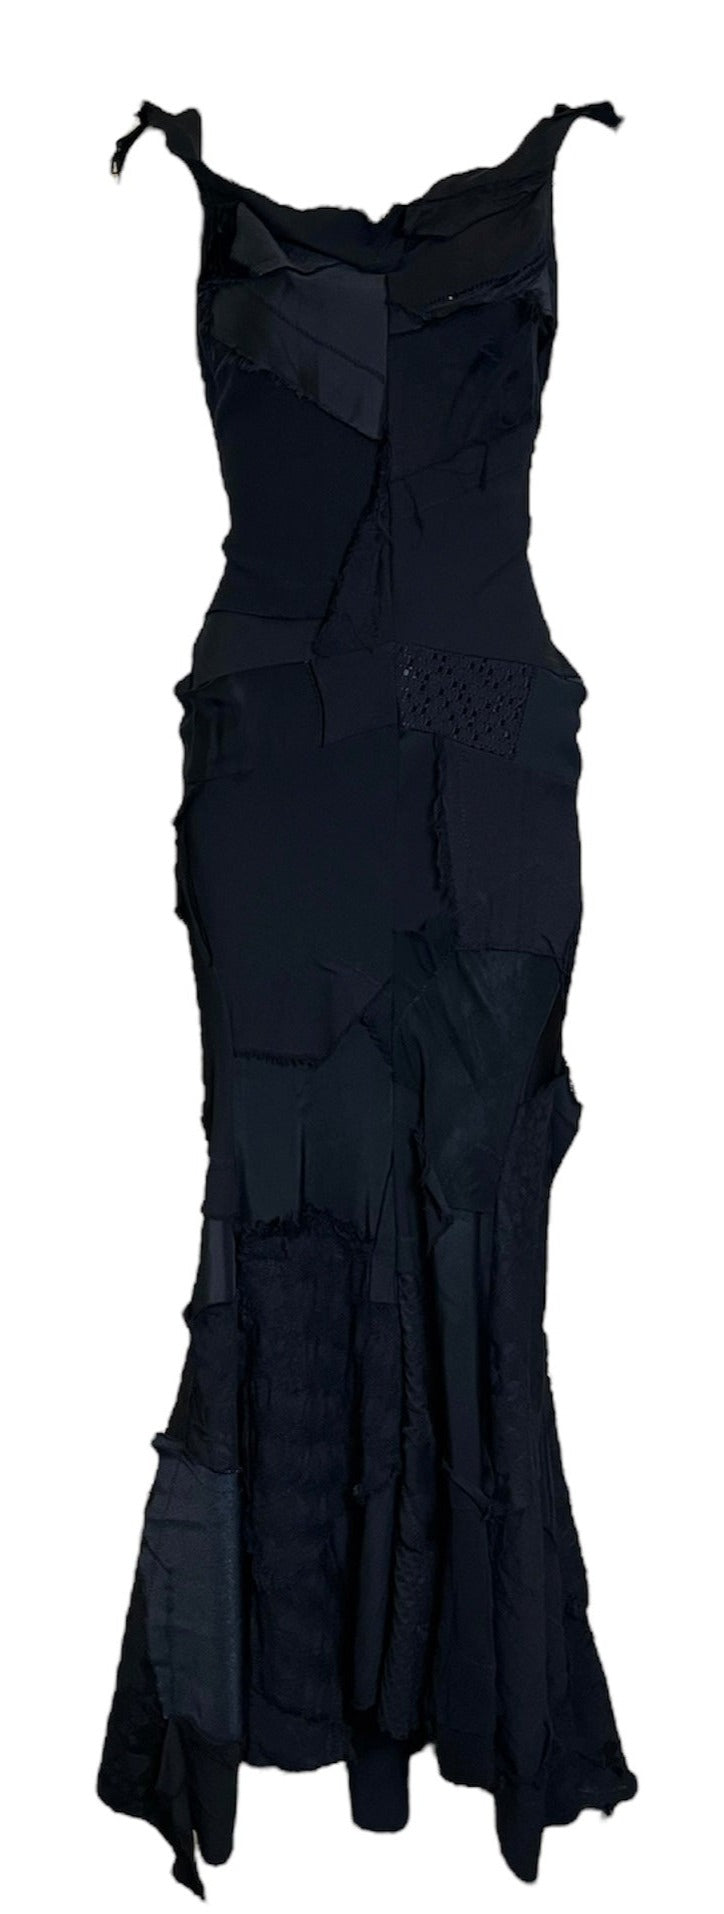  Junya Wantanabe for Comme des Garcons 2002 Black Wool Blend Patchwork Body Con Gown with Fluted Hem FRONT 1 of 8